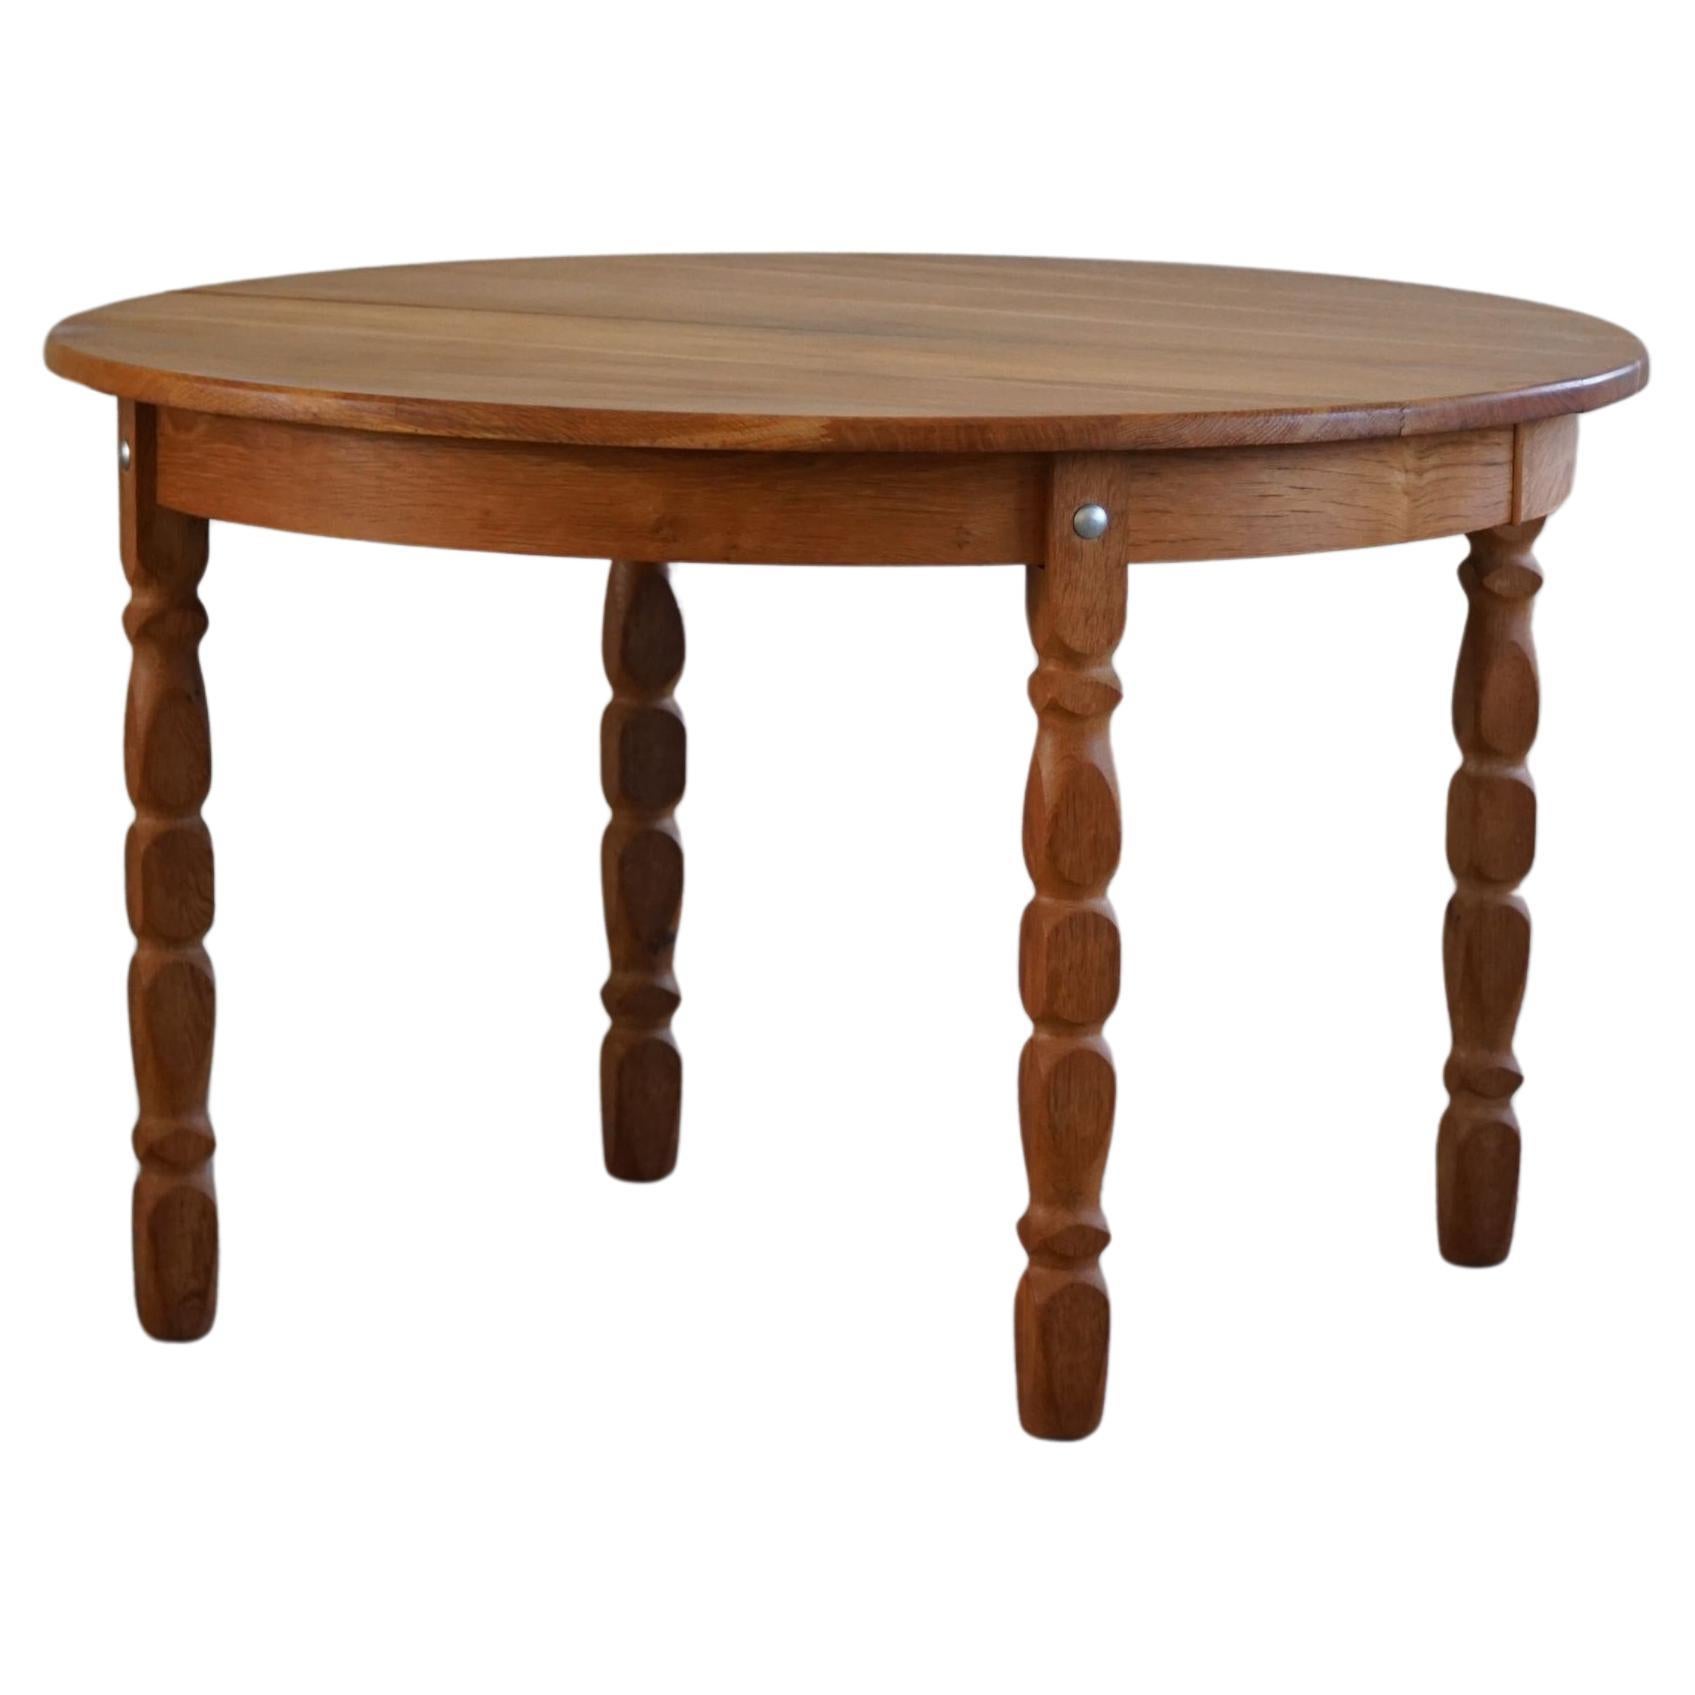 Mid-Century Danish Round Dining Table in Solid Oak with Two Extensions, 1960s